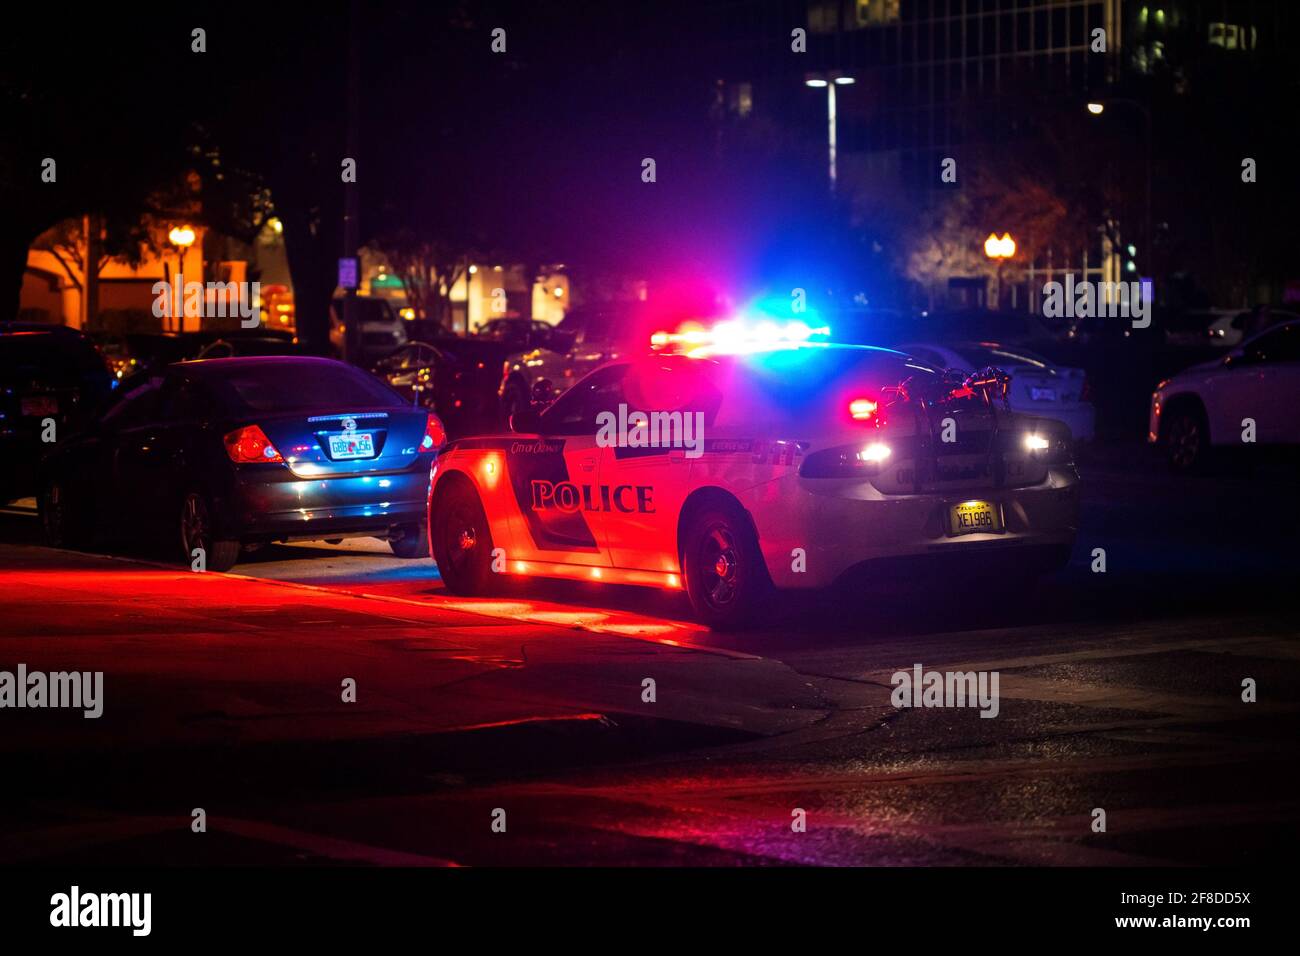 Police car with emergency lights flashing at night in city from the back Stock Photo